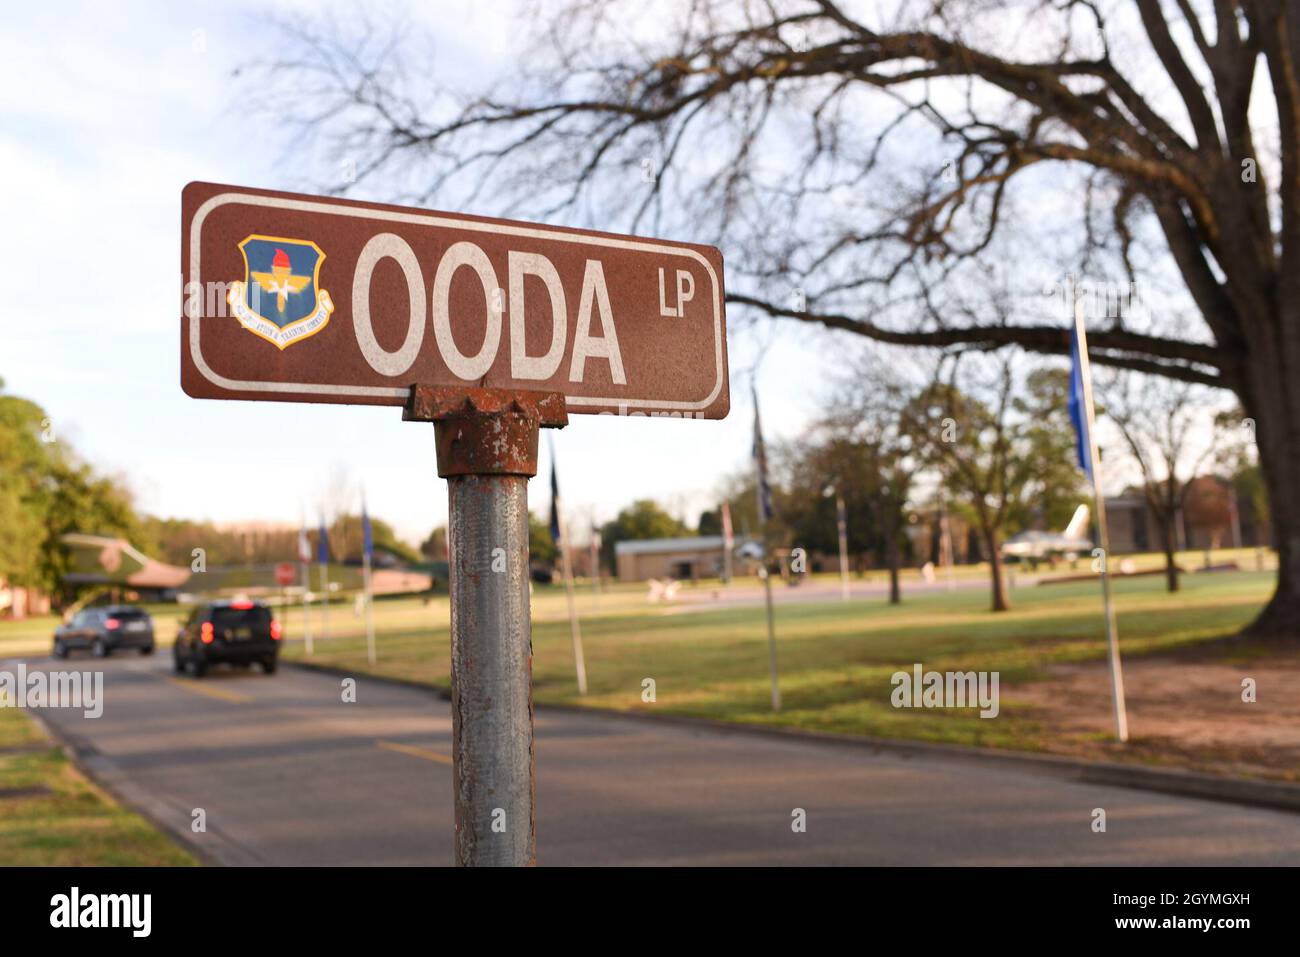 A street sign depicting OODA Loop sits on display February 3, 2020, at  Maxwell Air Force Base, Alabama. The looping street is a play on the acronym  for which it's named: Observe,